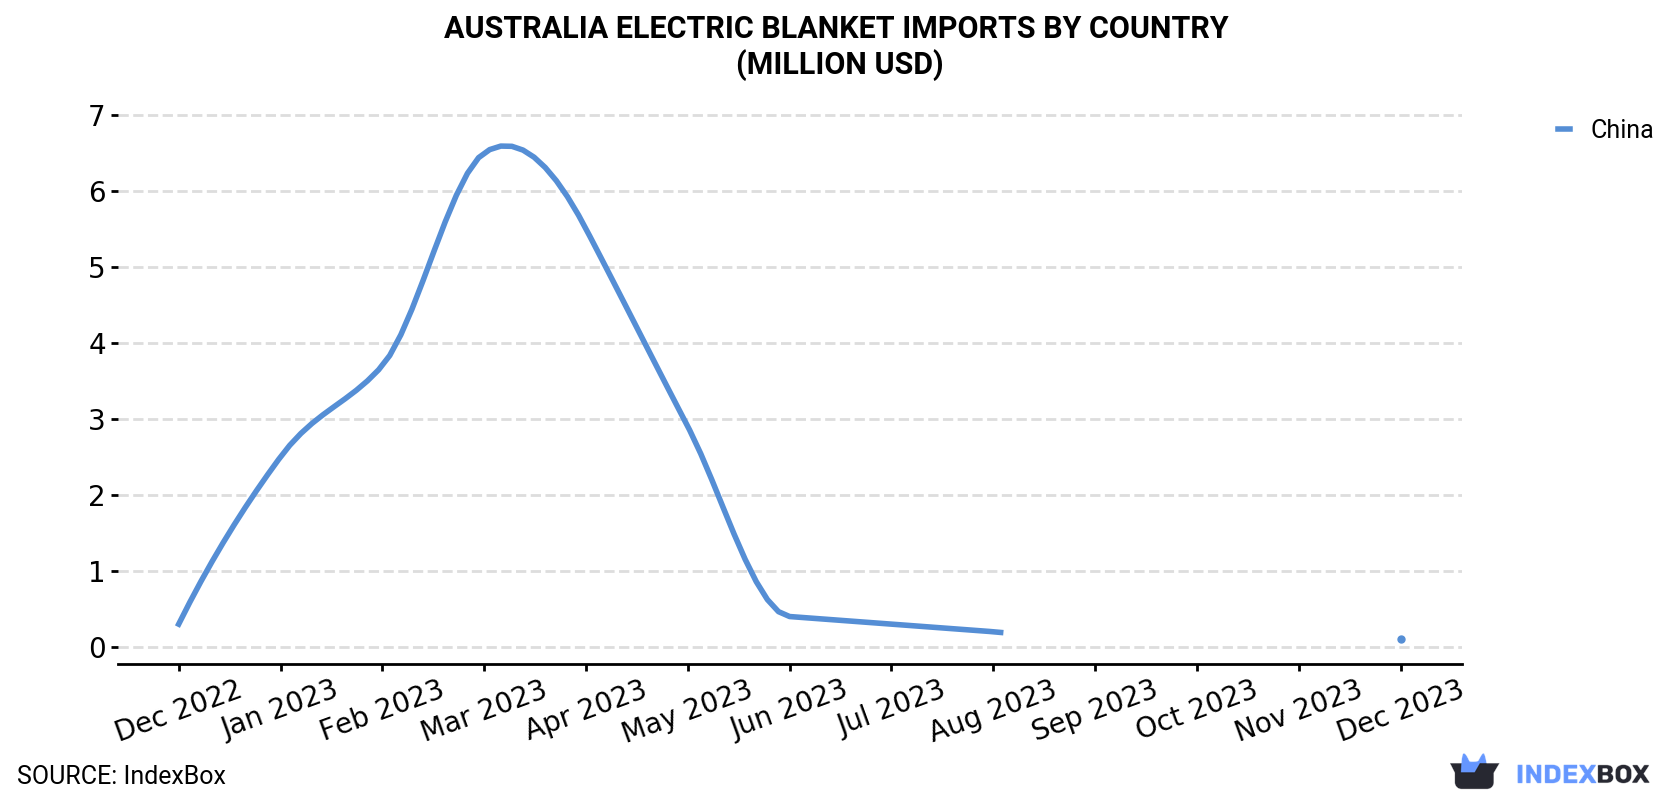 Australia Electric Blanket Imports By Country (Million USD)